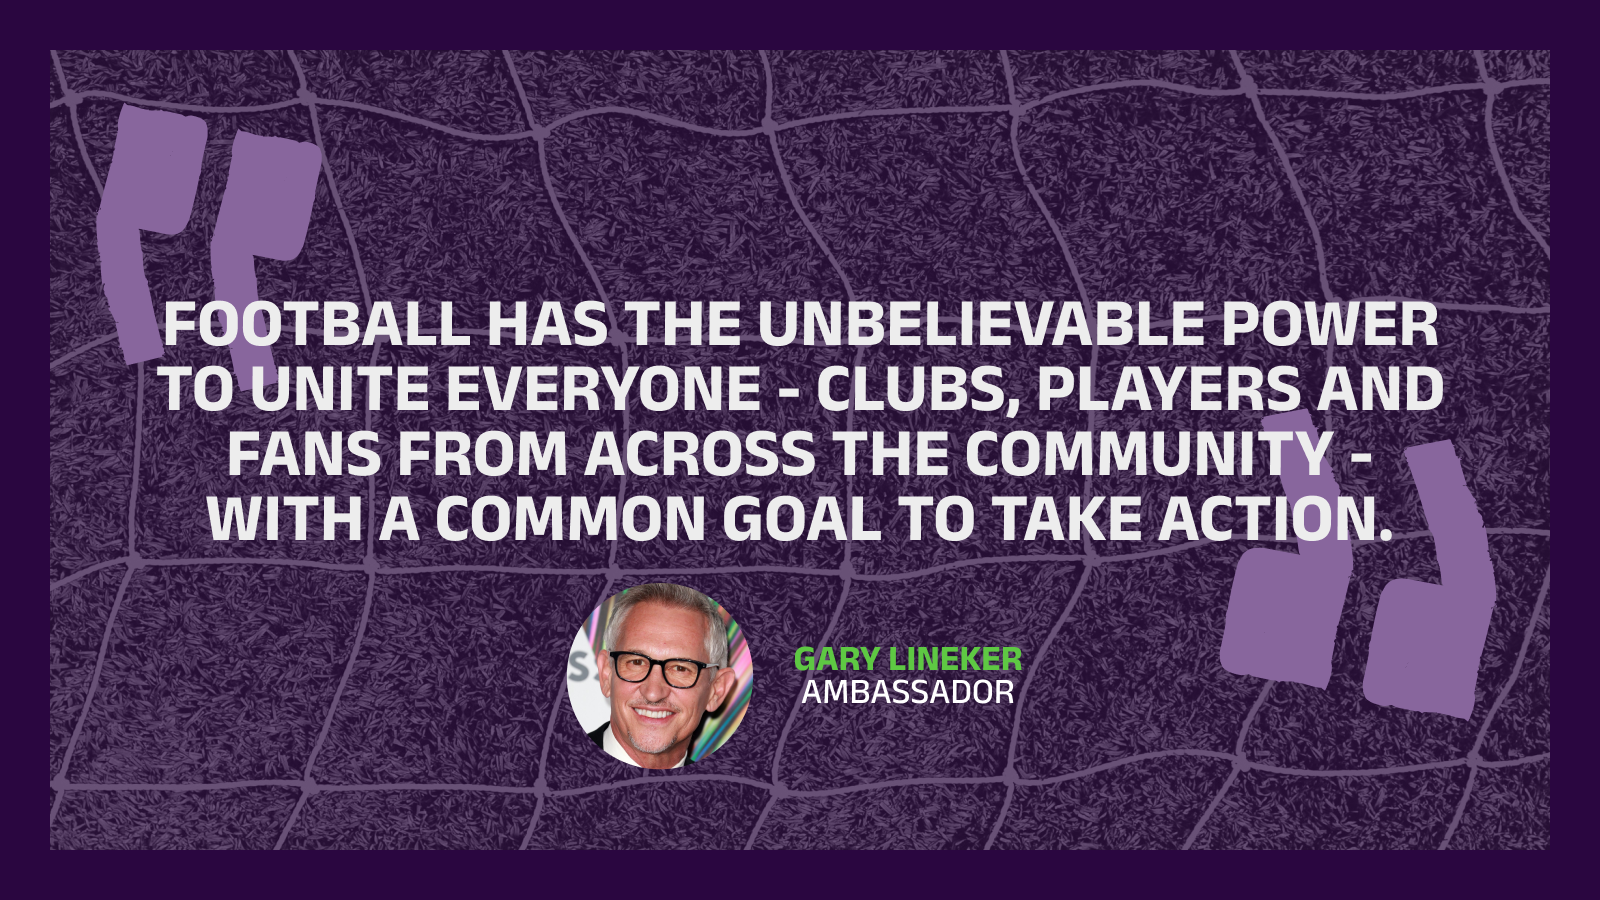 Quote from Gary Lineker - football has the unbelievable power to unite everyone, clubs, players and fans from across the community, with a common goals to  take action